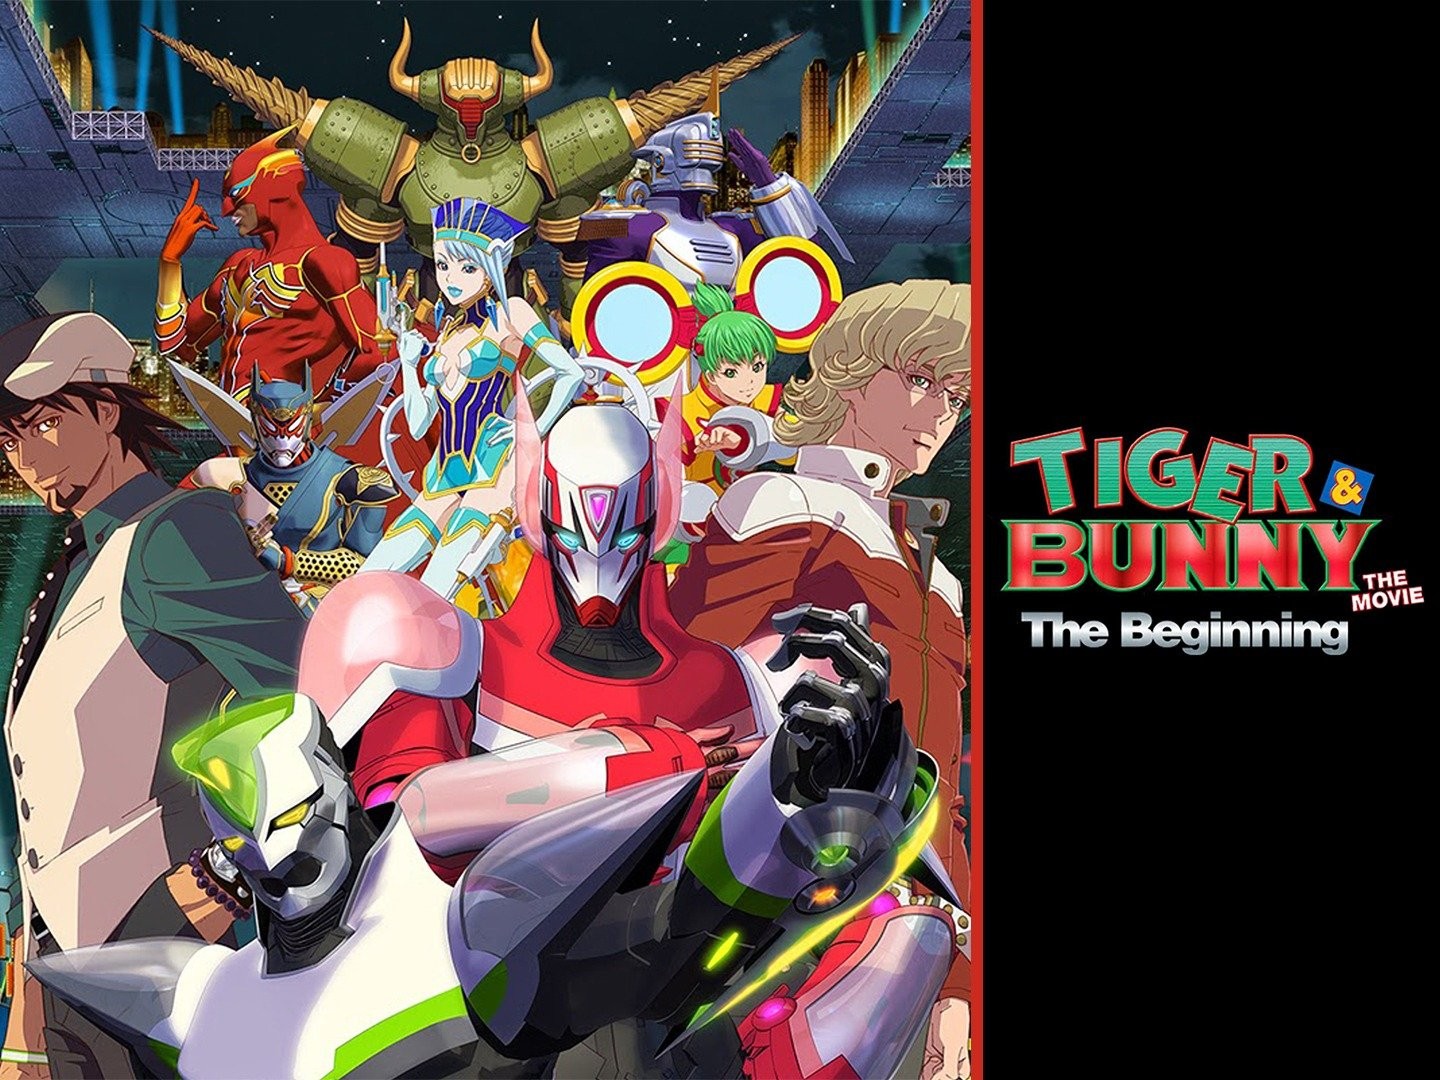 Tiger & Bunny: The Movie - The Beginning | Rotten Tomatoes